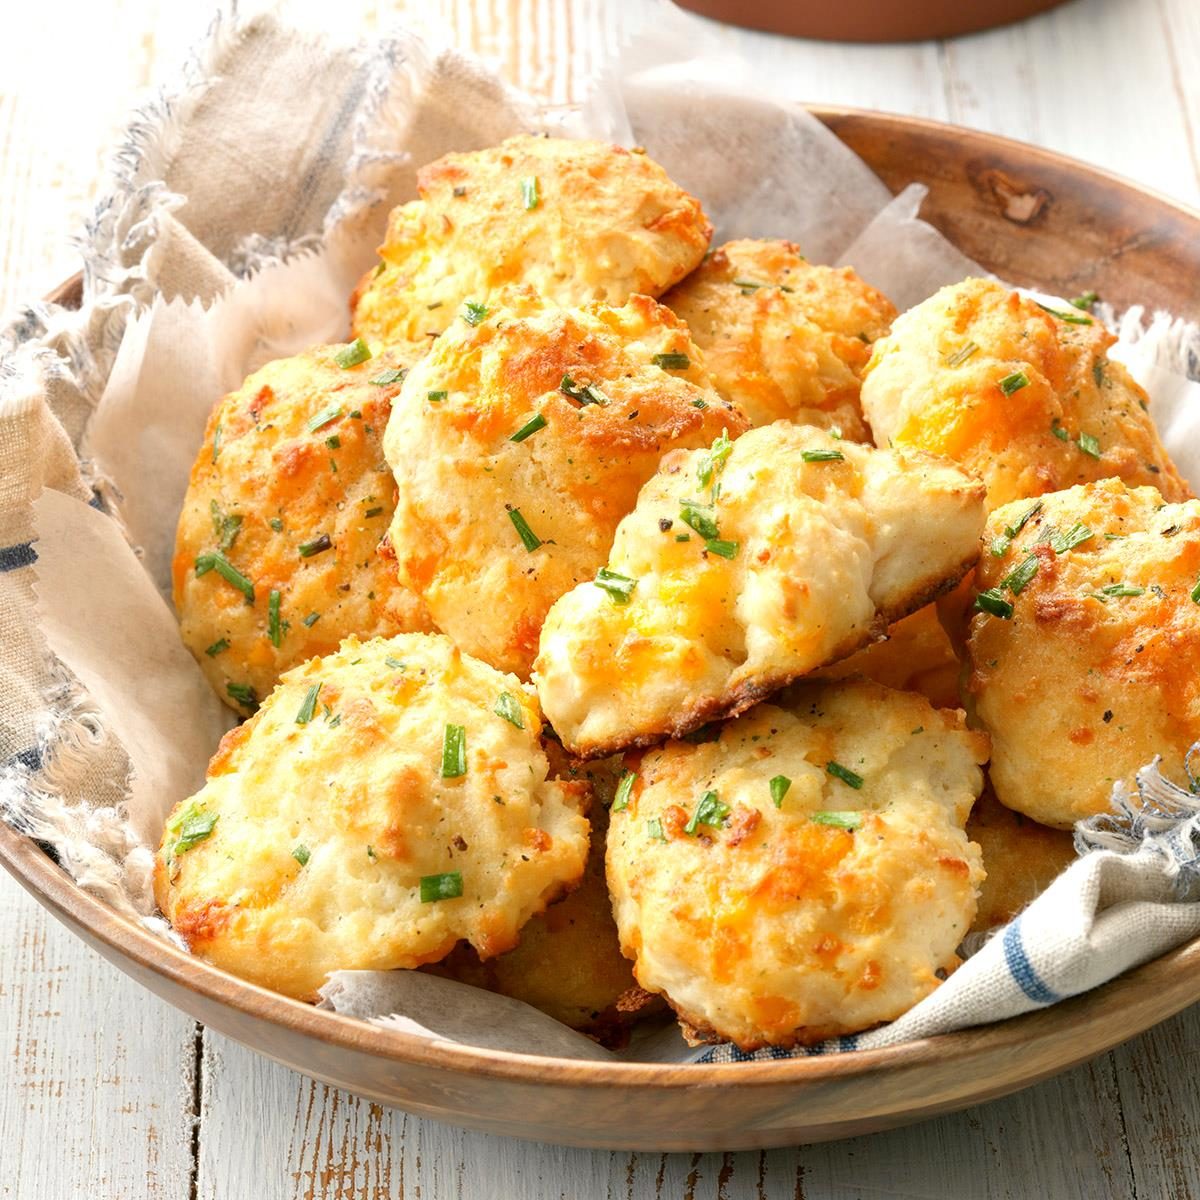 Inspired by: Cheddar Bay Biscuits from Red Lobster